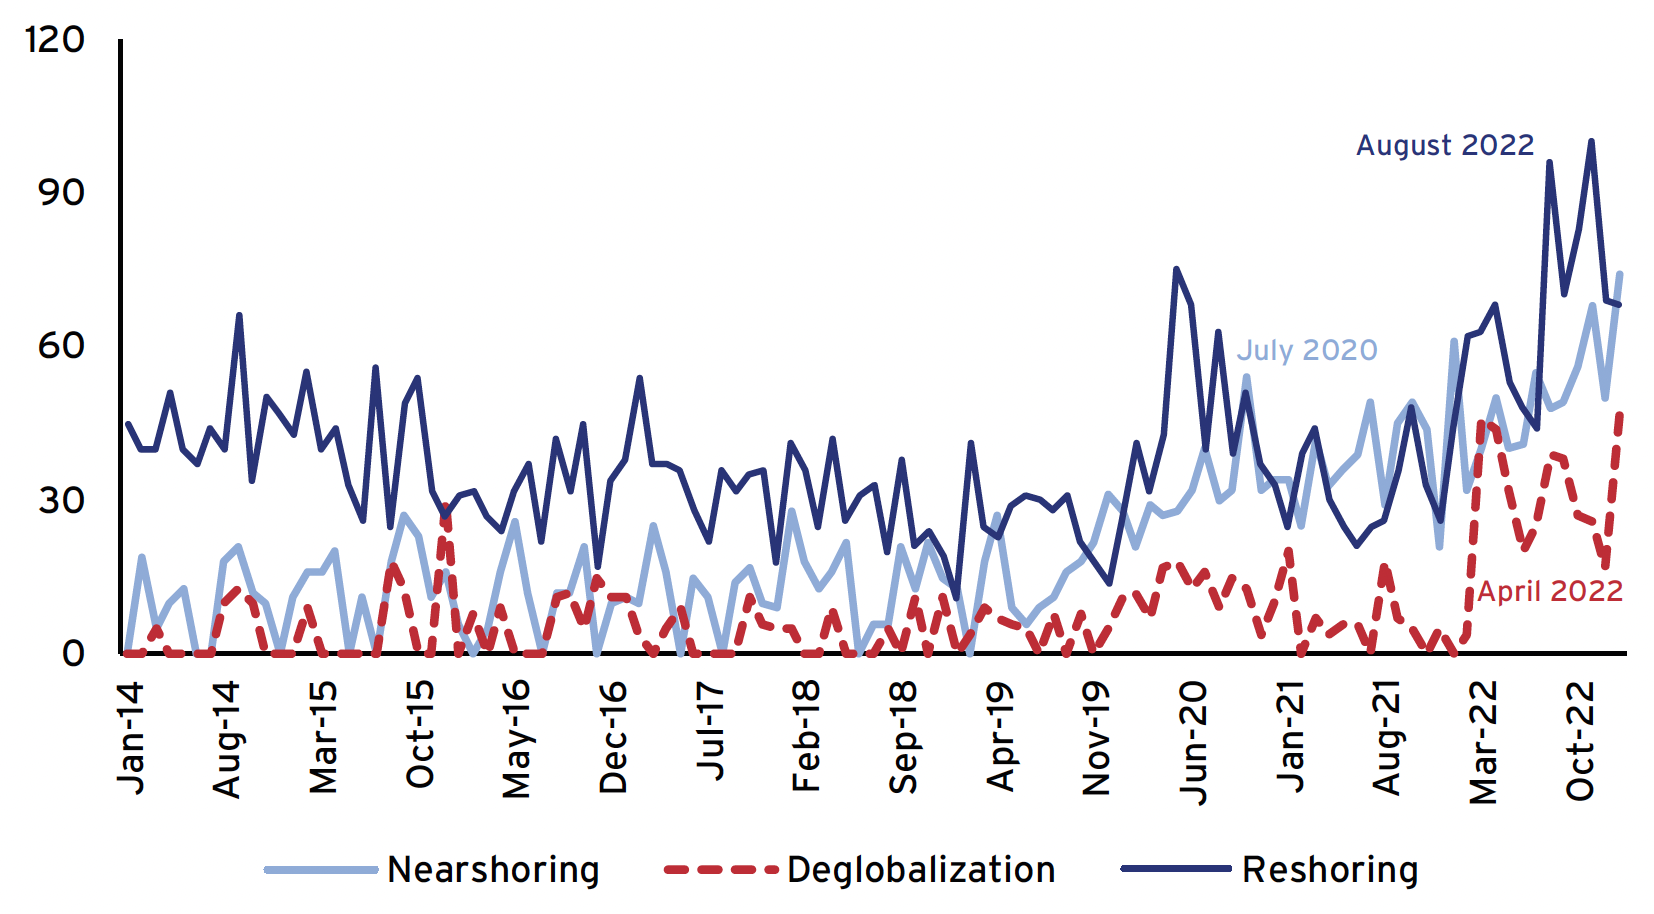 Figure 1 Google Searches for “nearshoring”, “deglobalisation”, and “reshoring”